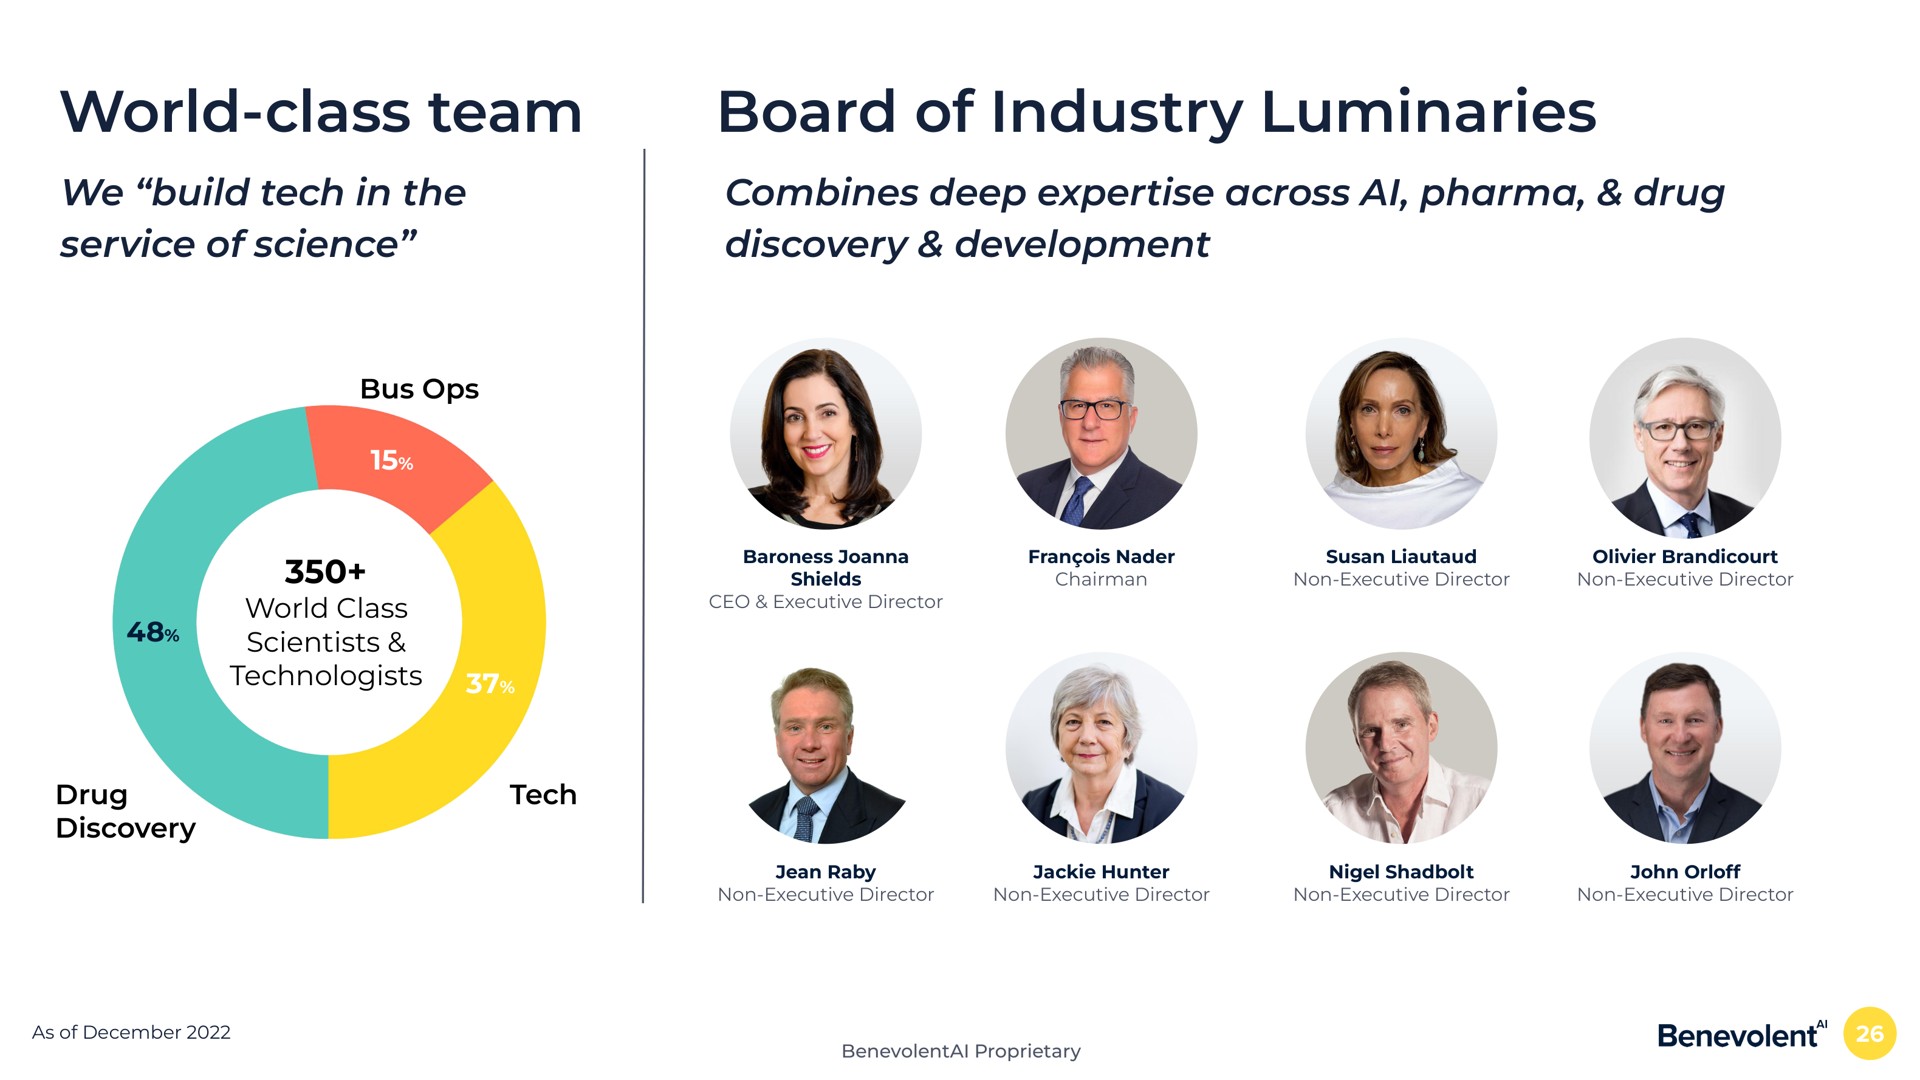 world class team board of industry luminaries we build tech in the service of science combines deep across drug discovery development bus world class scientists technologists drug discovery tech | BenevolentAI